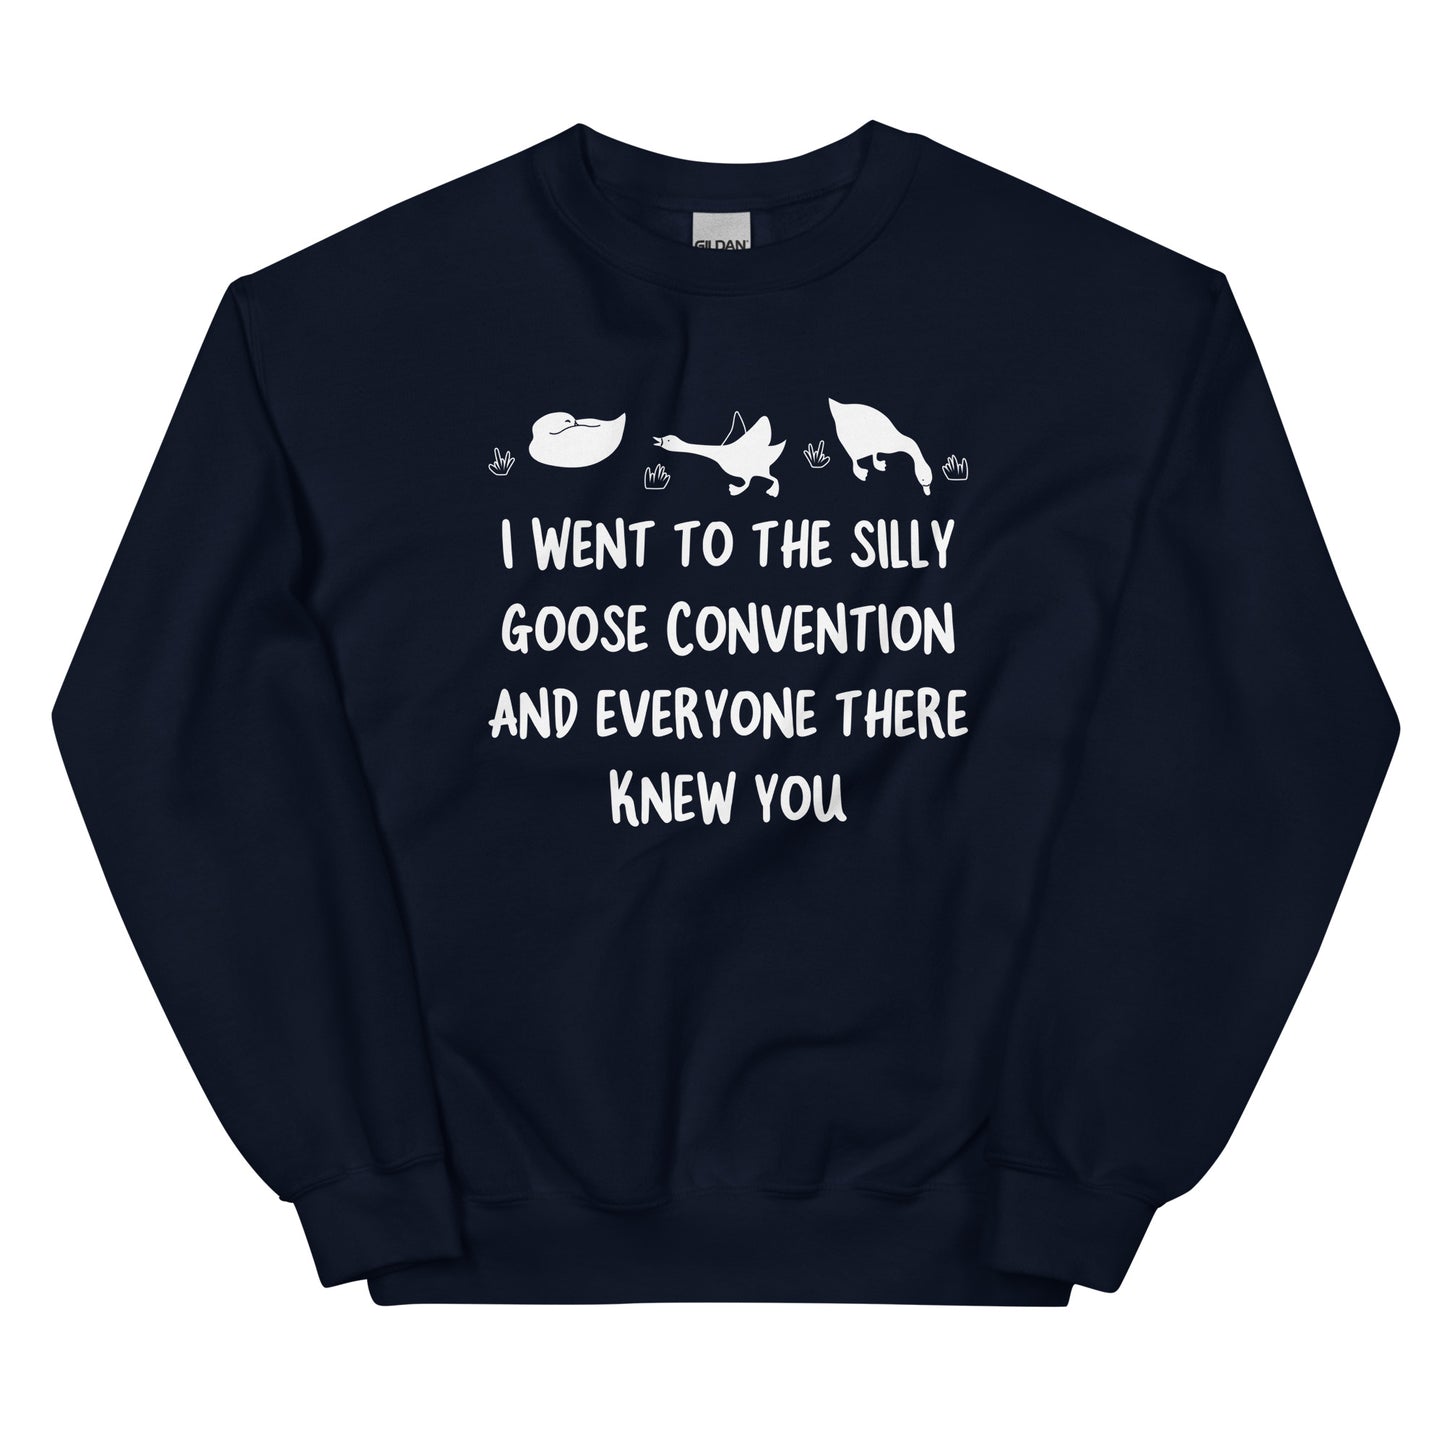 The Silly Goose Convention Unisex Sweatshirt